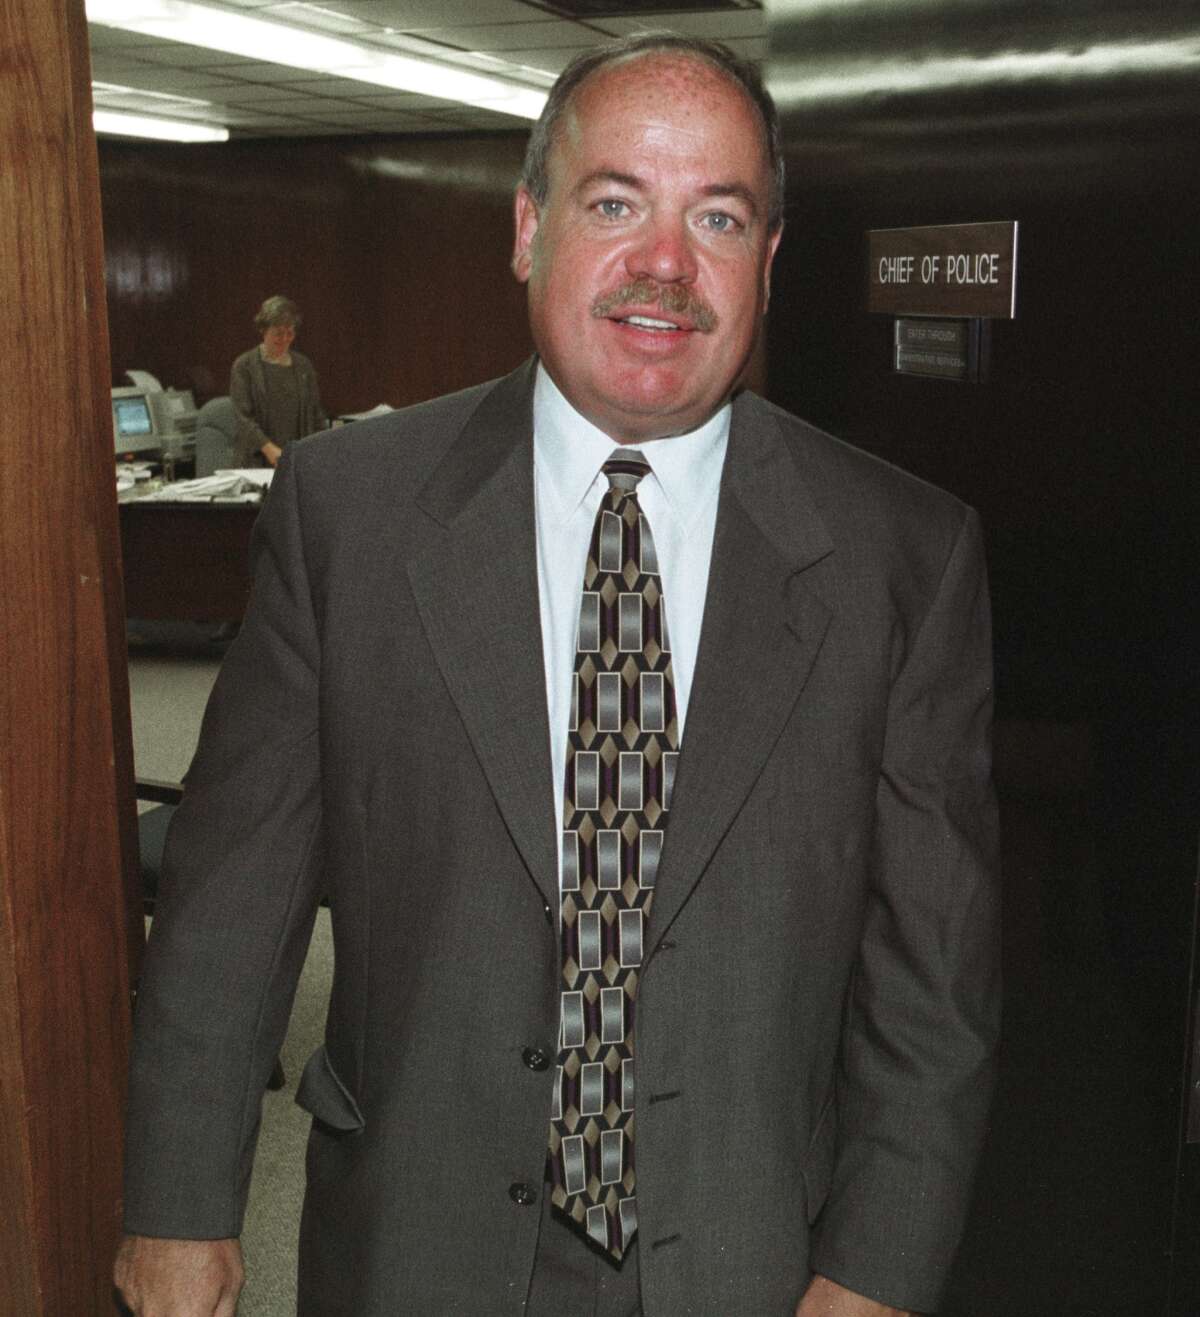 Times Union Staff Photo by Skip Dickstein -- Albany Police Chief Kevin Tuffey announced his resignation from the Albany Police Department effective October 2, 1999 on September 15, 1999 at his offices in Albany New York.